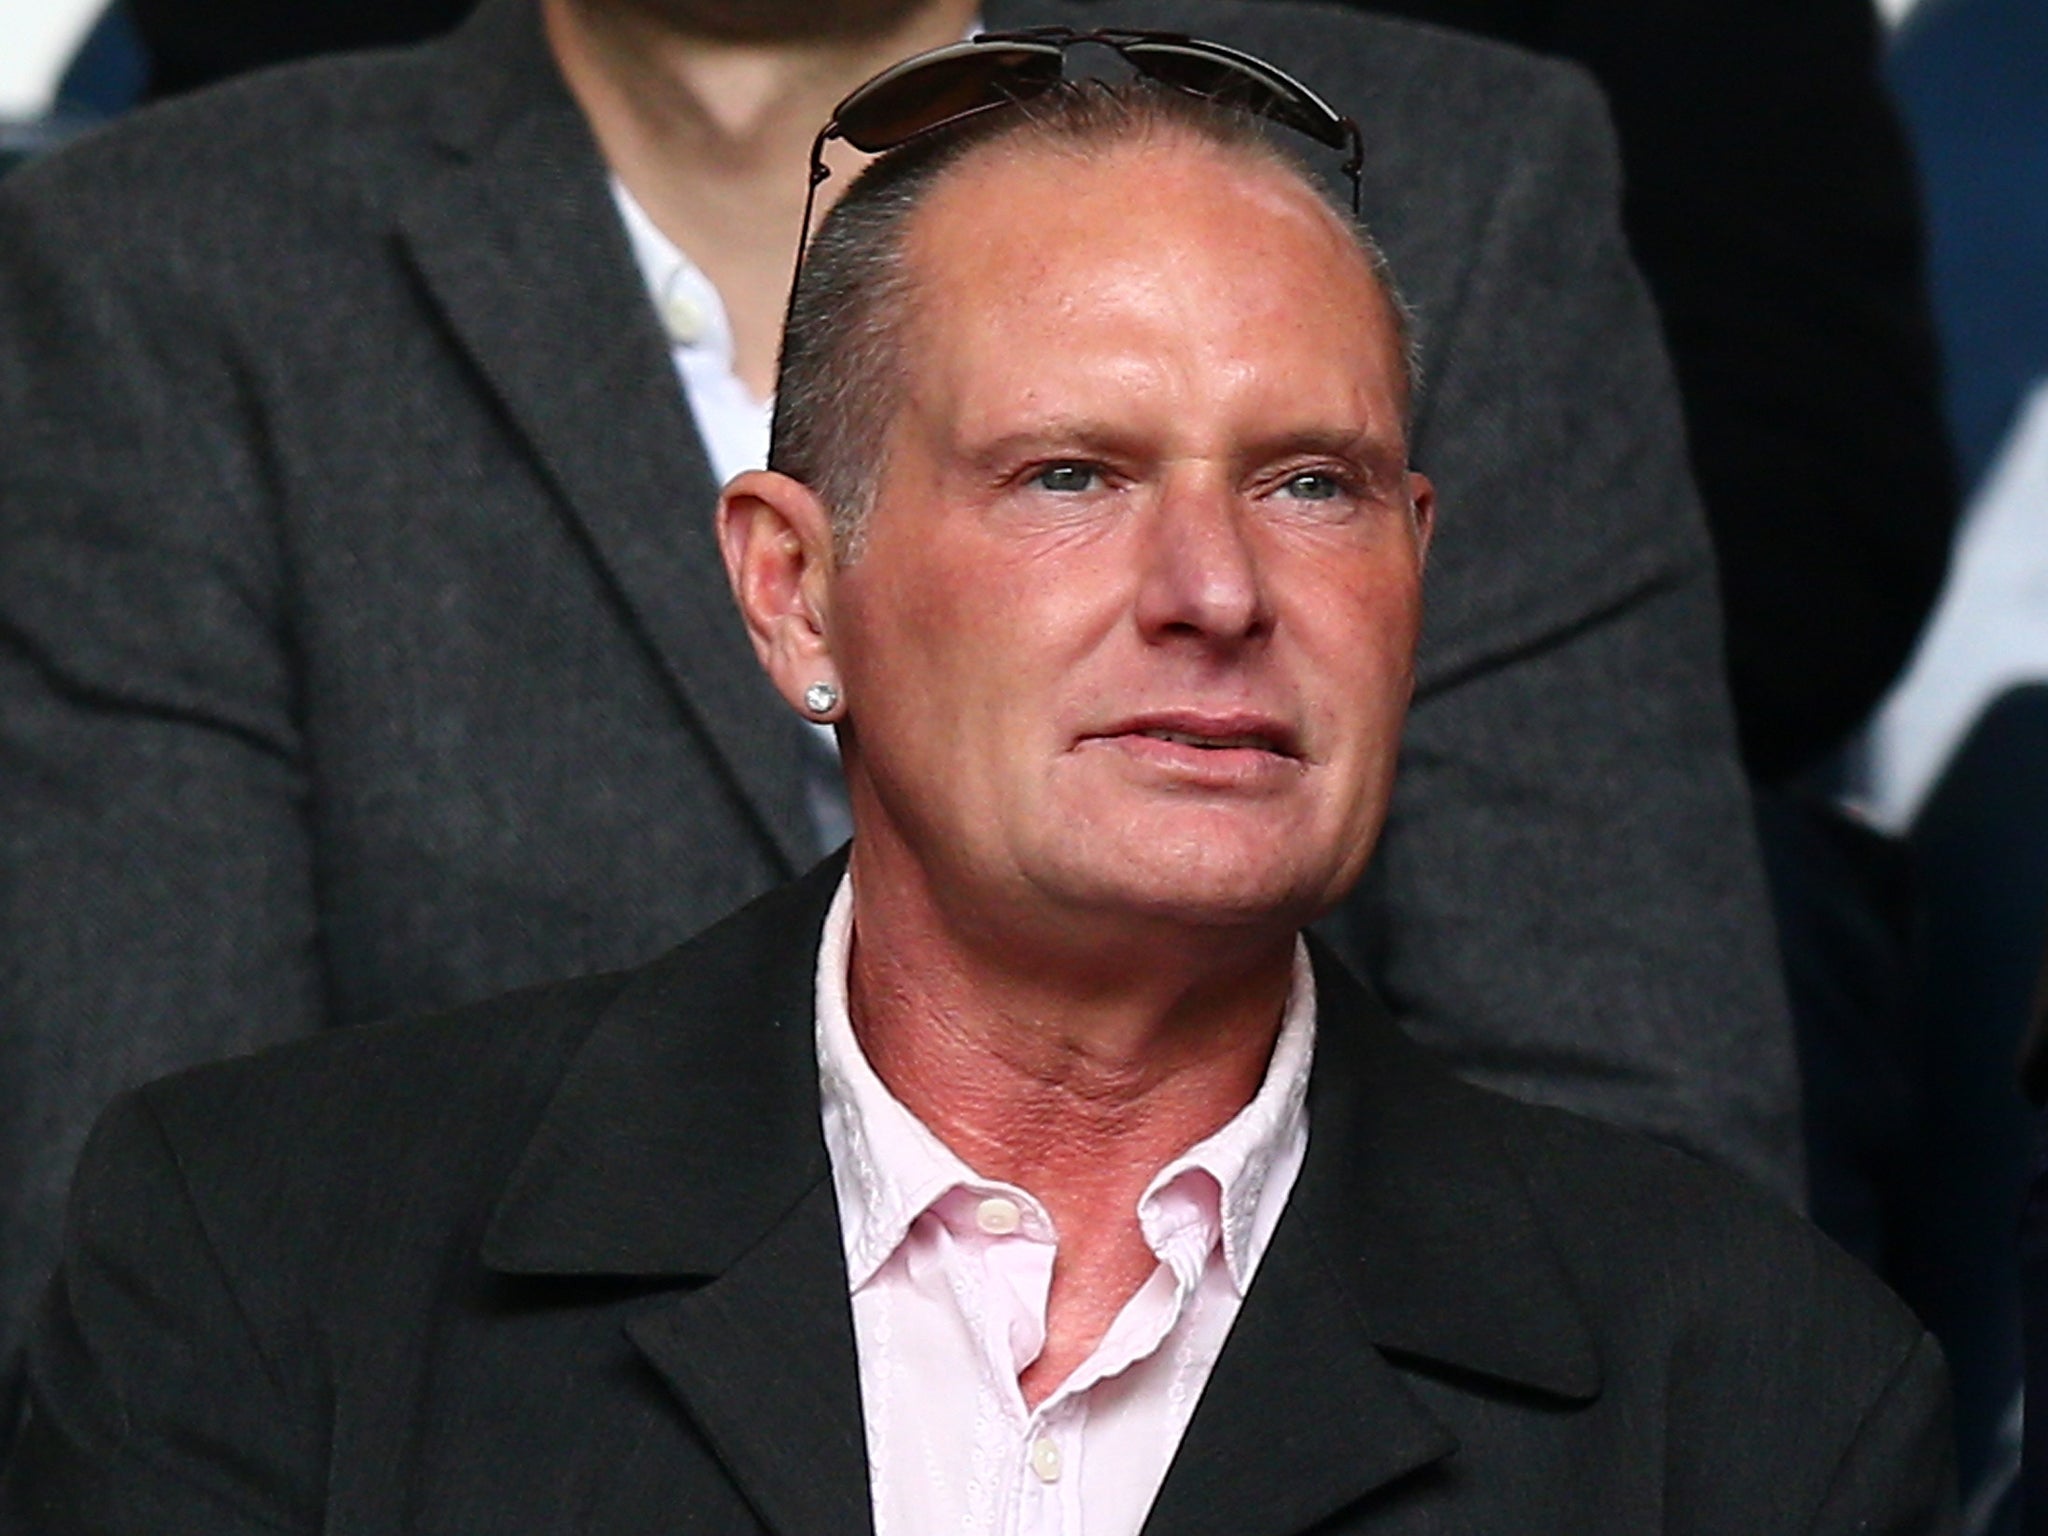 Gascoigne pictured at a football match in April last year